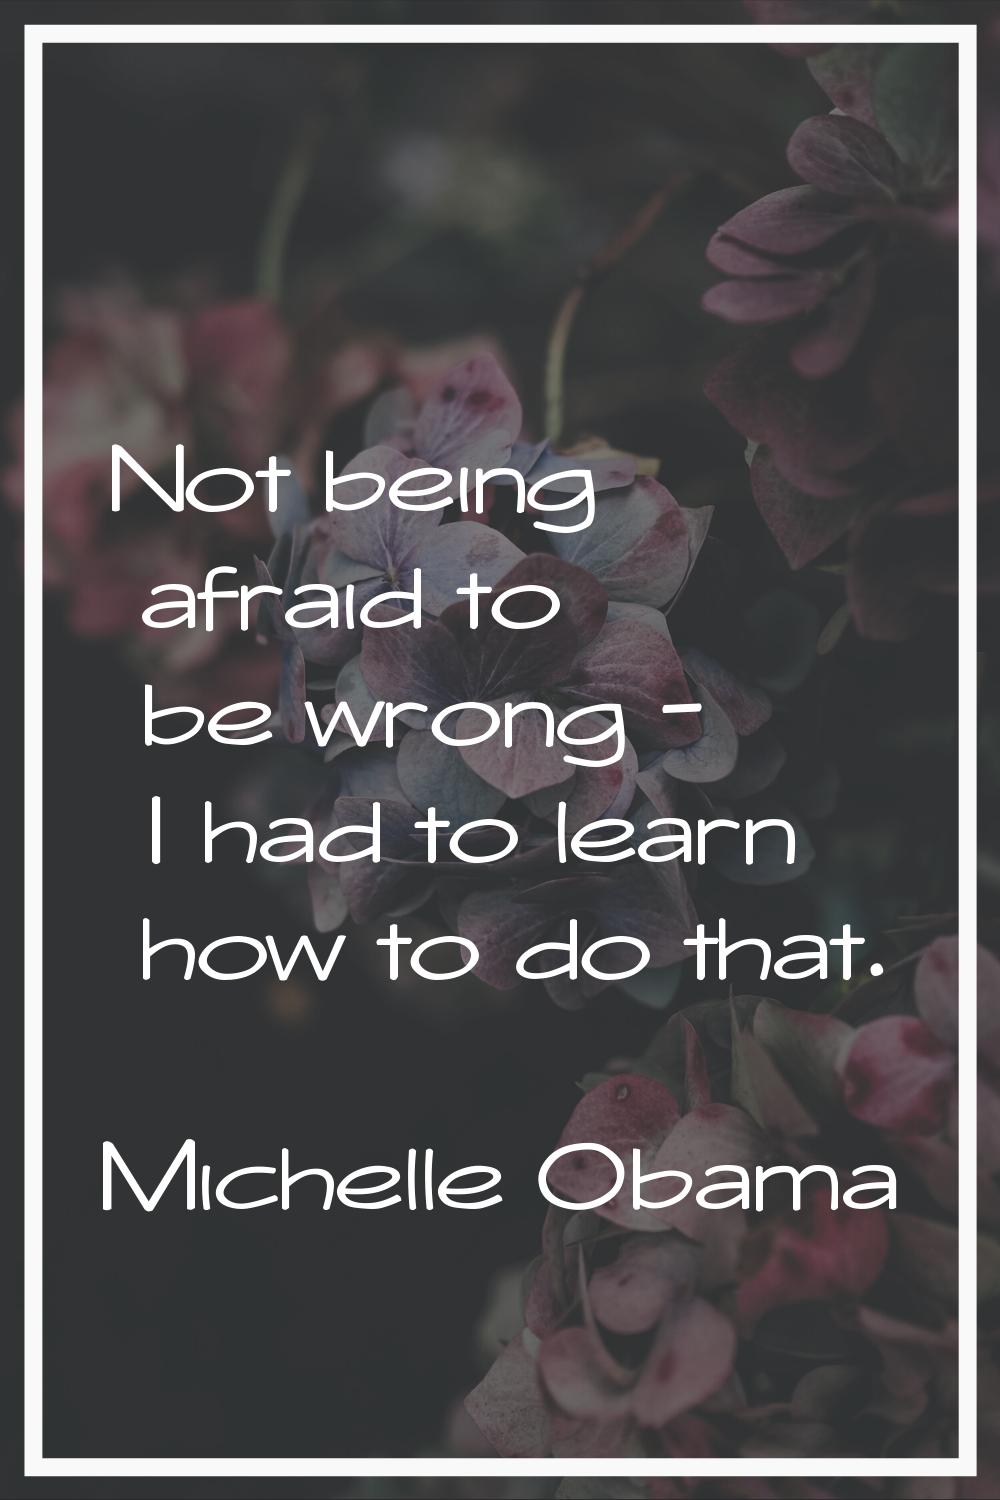 Not being afraid to be wrong - I had to learn how to do that.